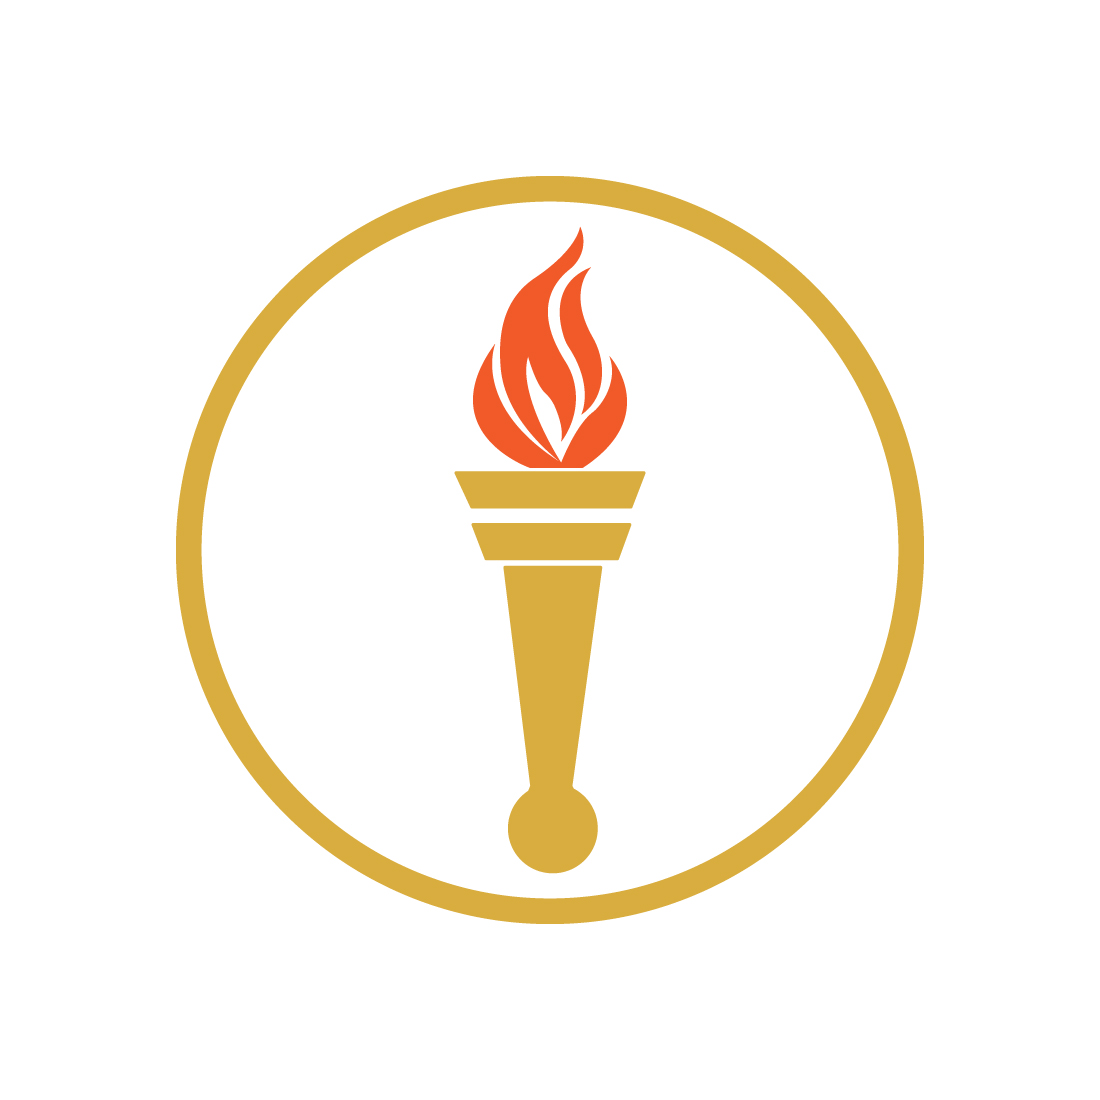 Olympic Torch Icon IN Cartoon Style Isolated Template Images Fire Torch logo design cover image.